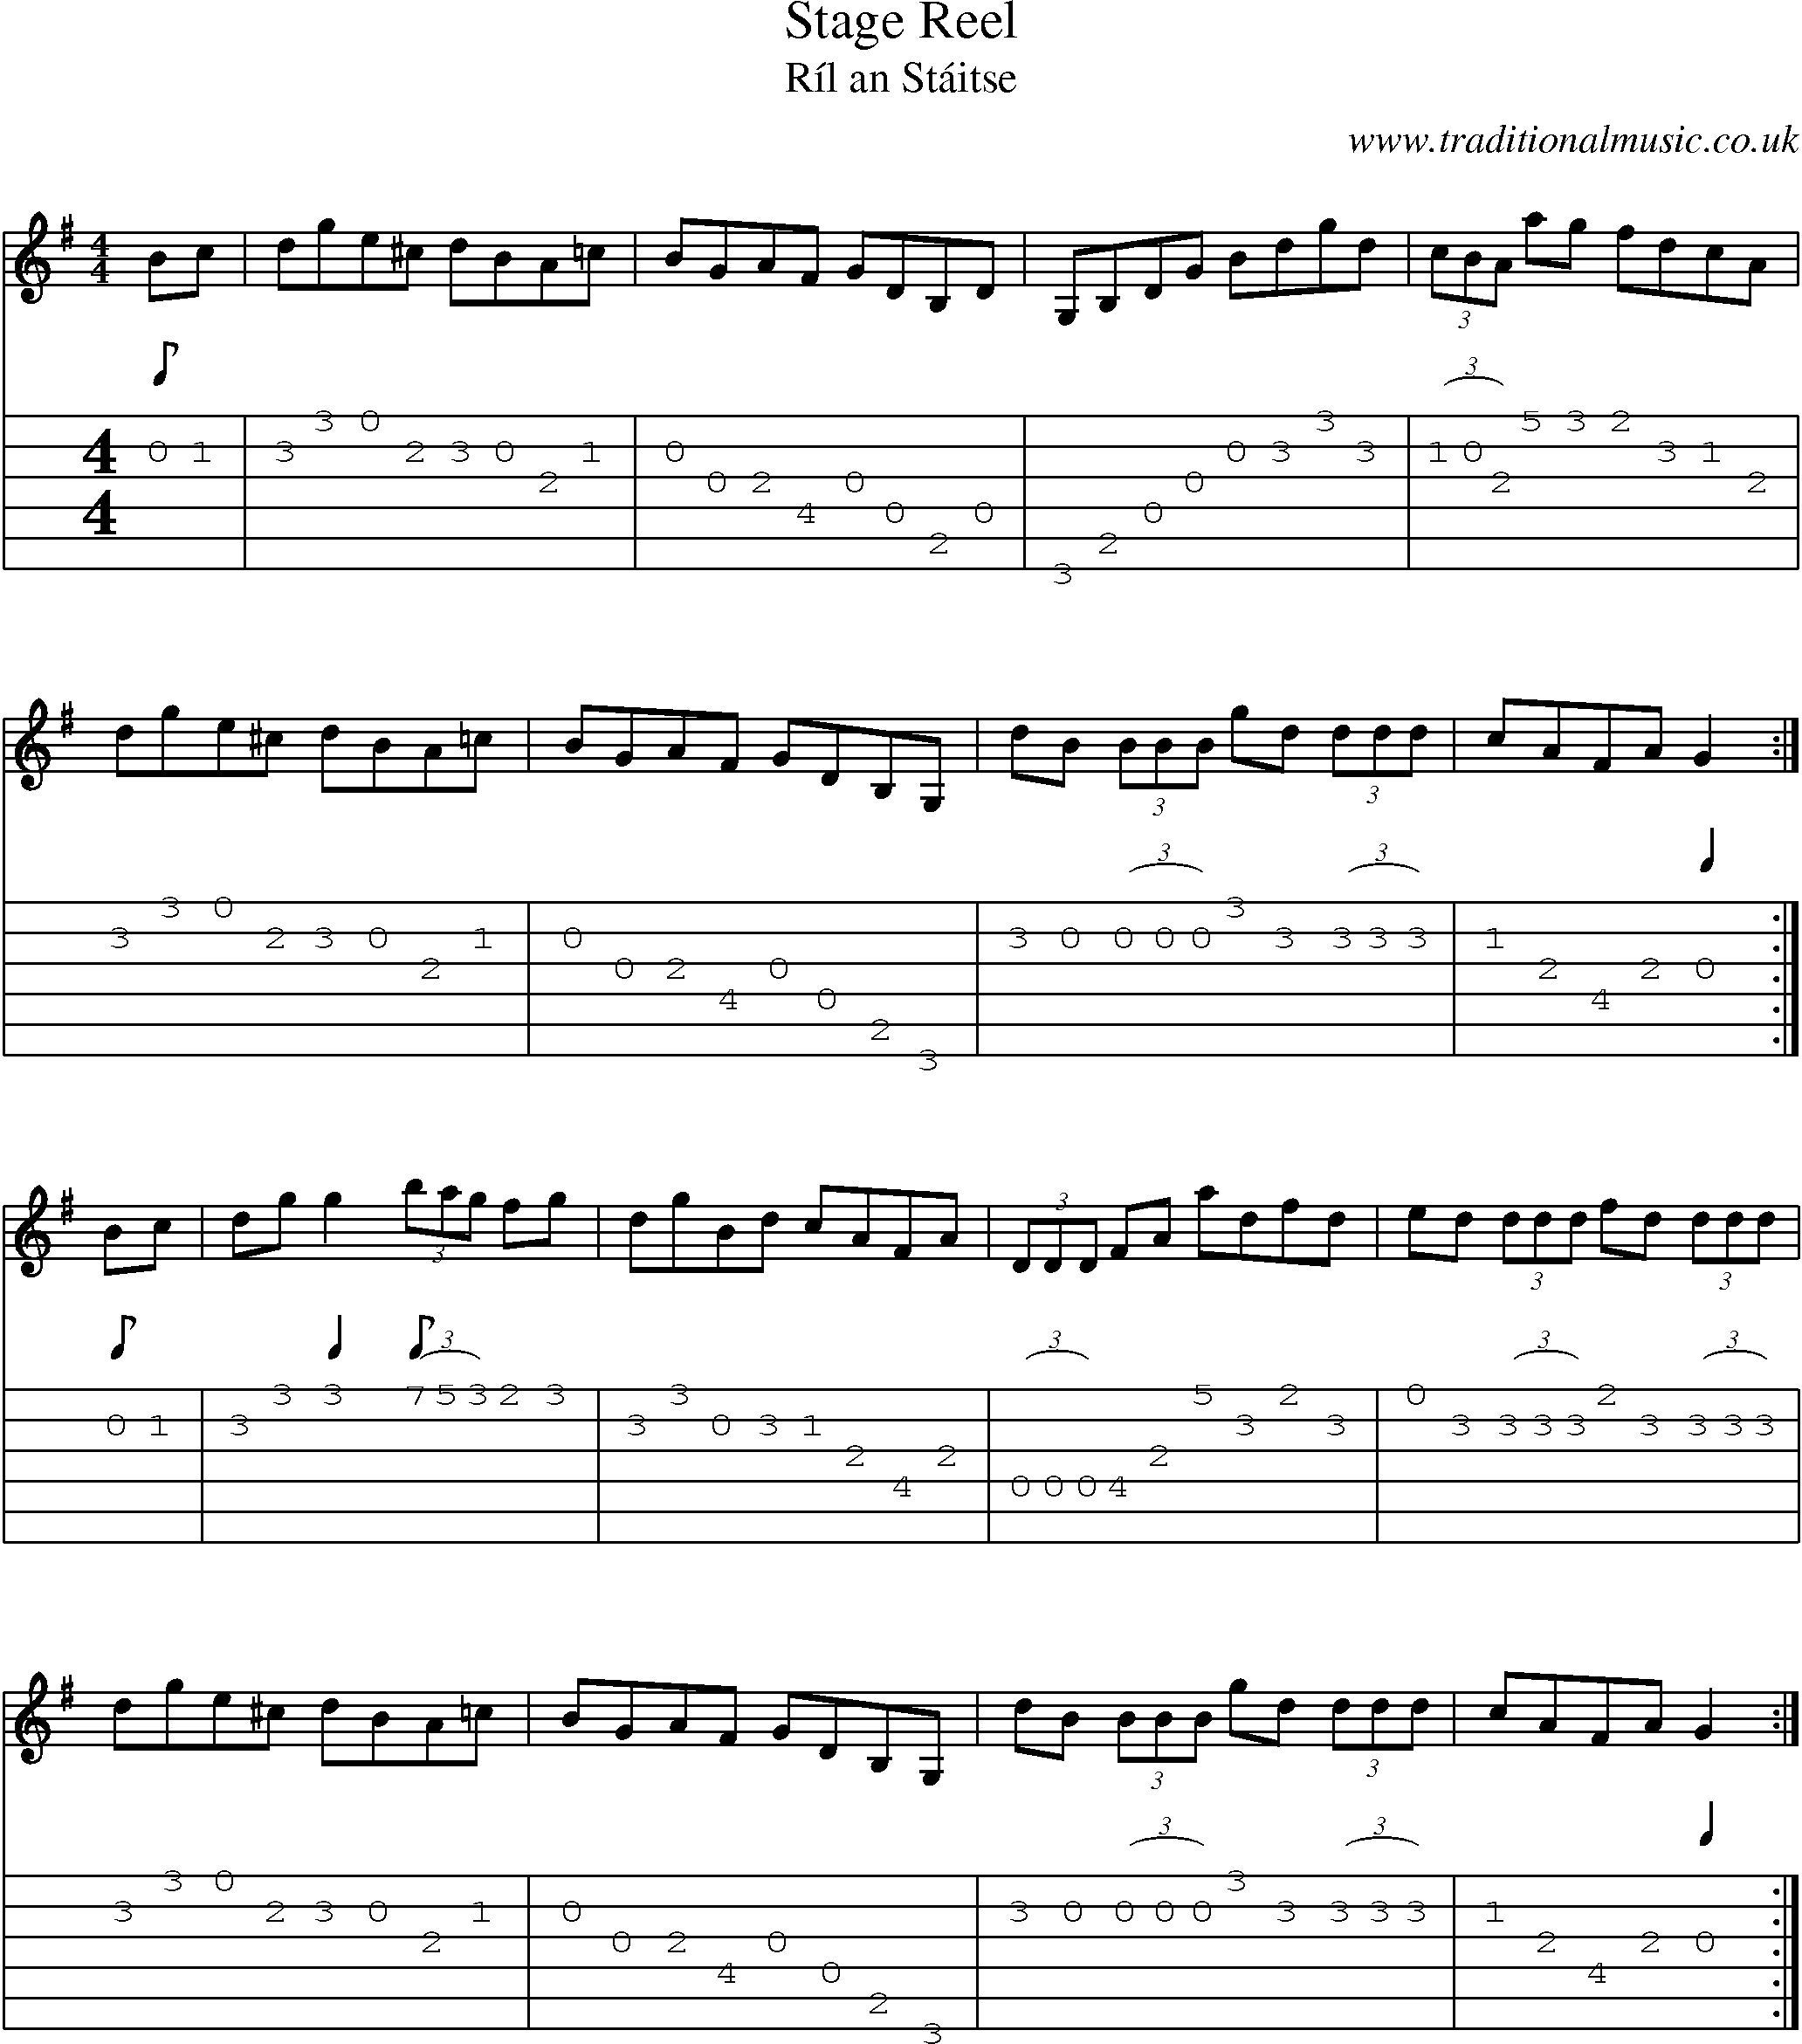 Music Score and Guitar Tabs for Stage Reel